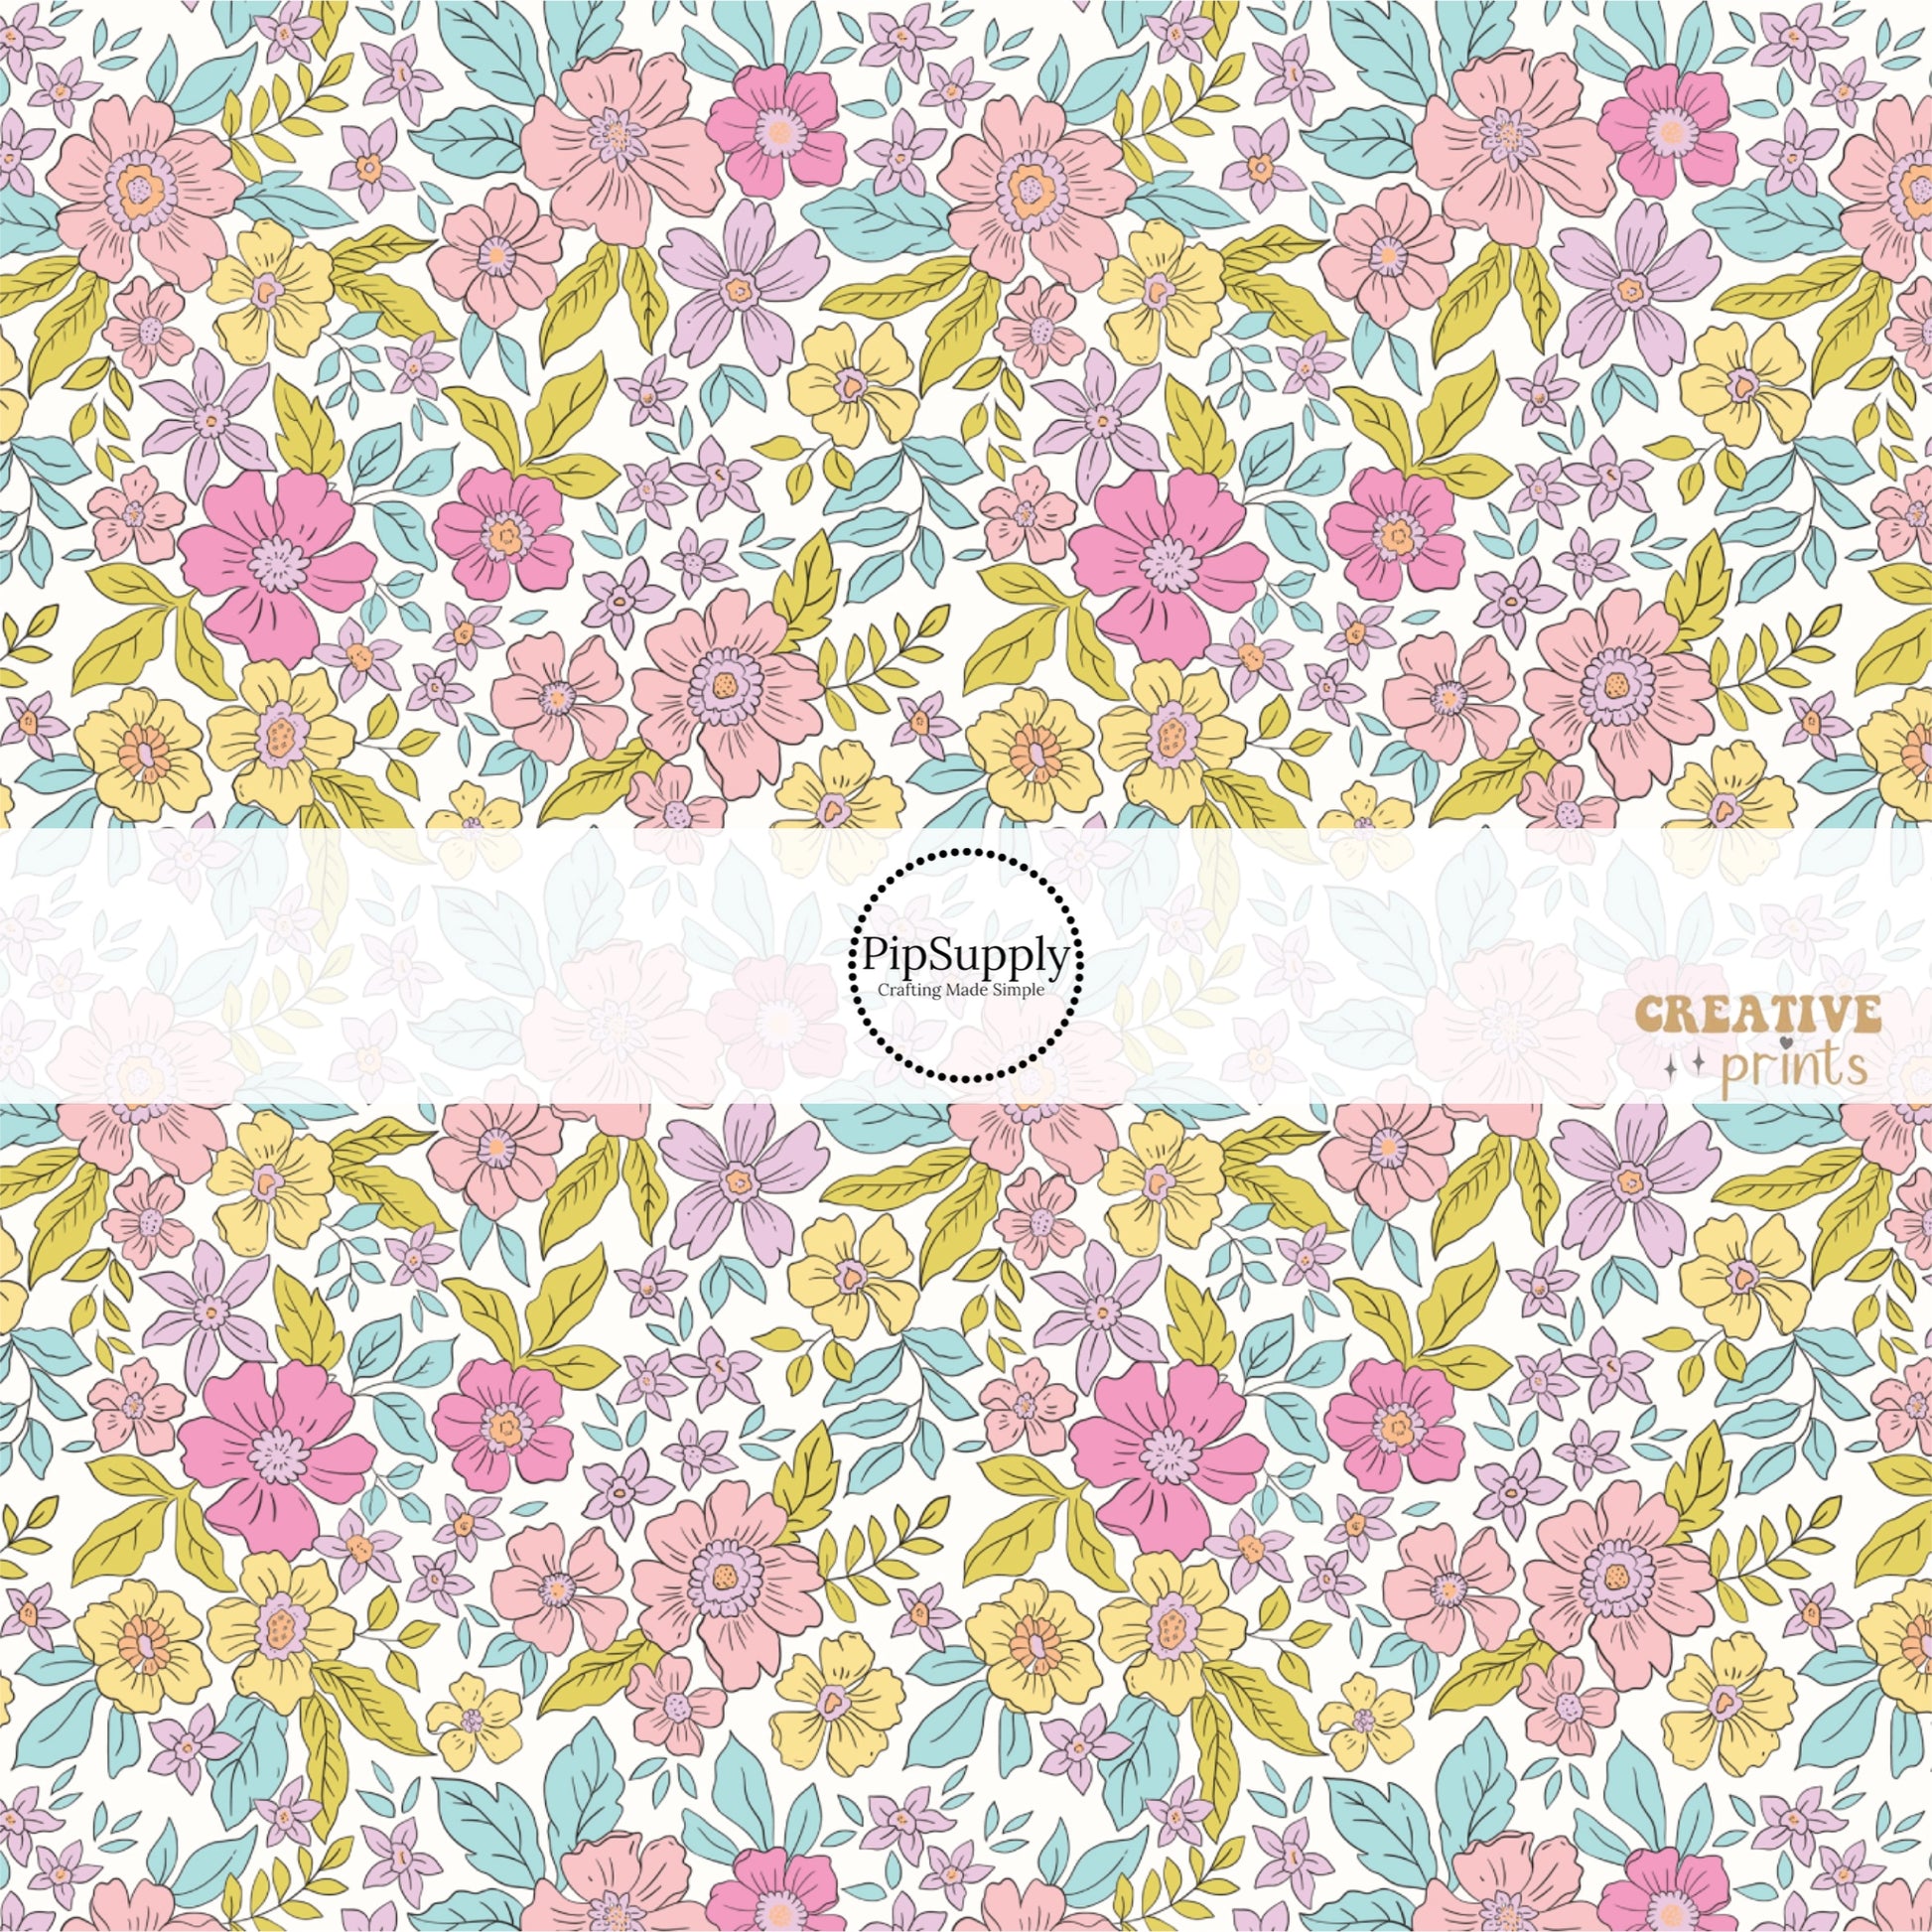 Pink, Purple, and Yellow flowers with blue leaves fabric by the yard - Spring Easter Floral Fabric 